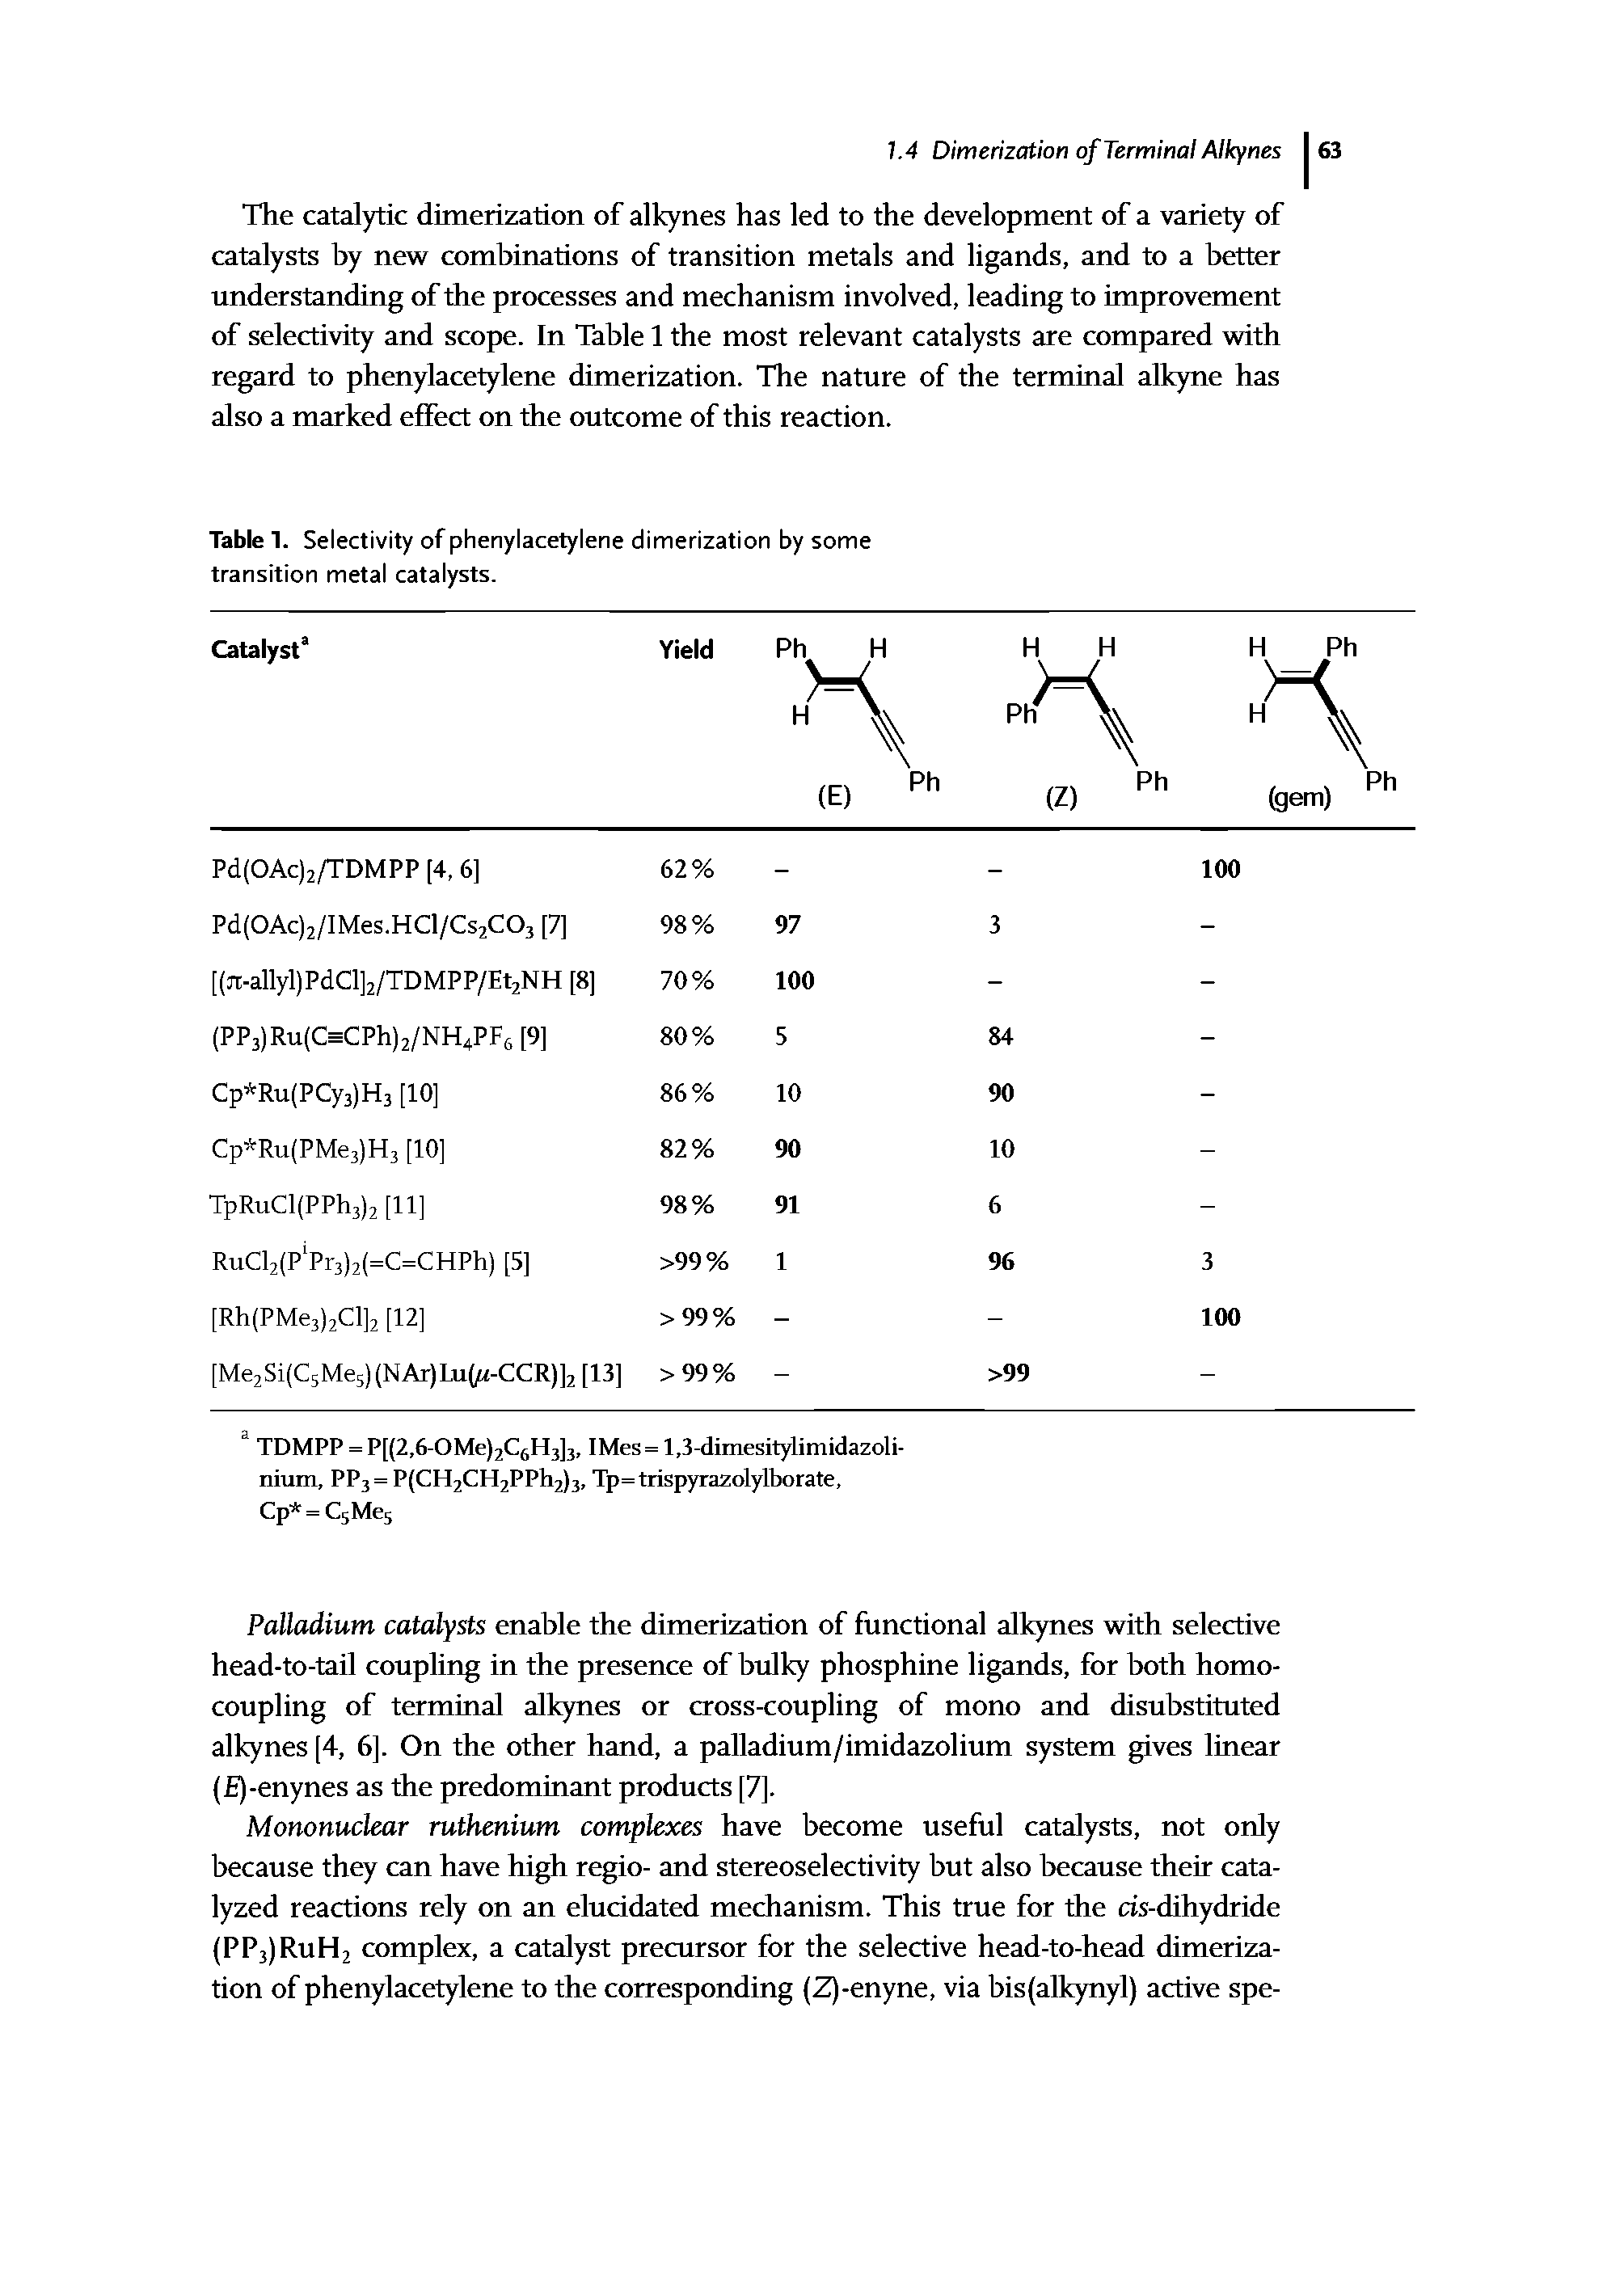 Table 1. Selectivity of phenylacetylene dimerization by some transition metal catalysts.